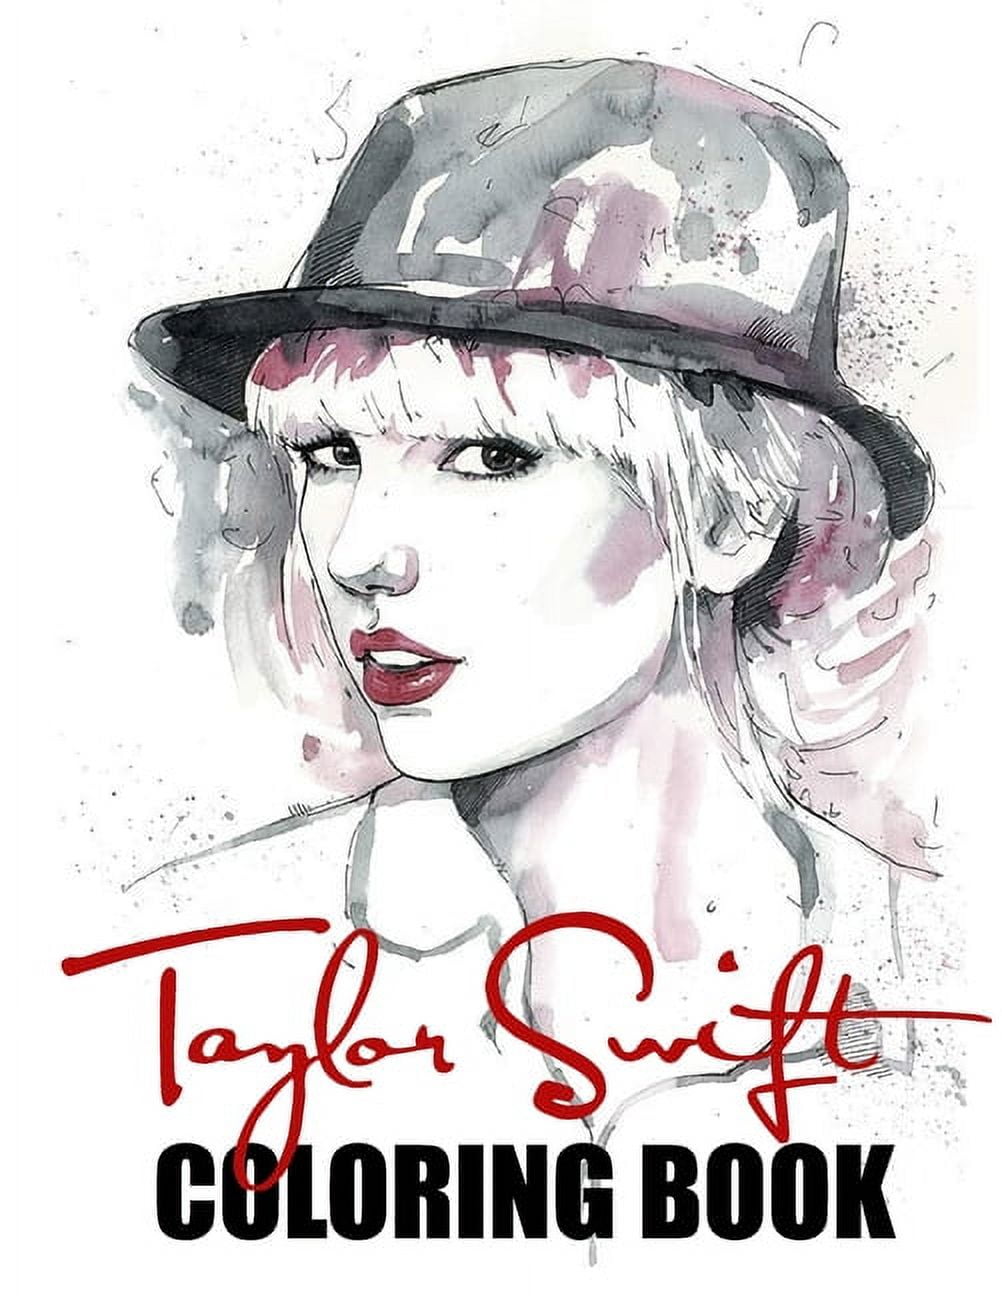 Taylor Swift Coloring Book : New coloring book for all fans easy and  relaxing designs (Paperback)